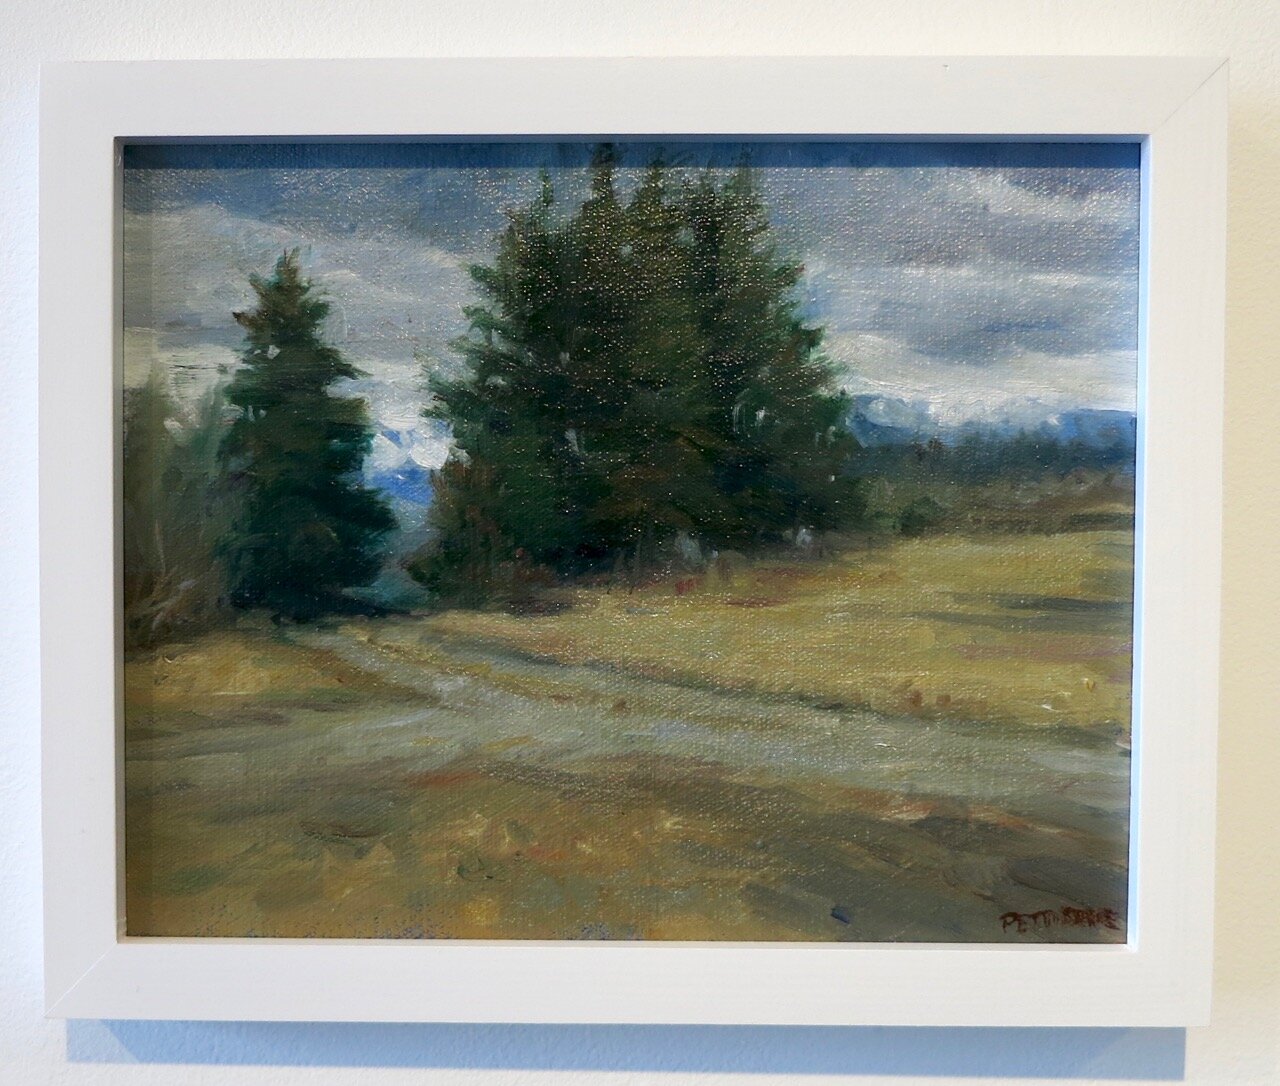    Spring View From the Shop , 2020   Oil on canvas  8x10 inches 